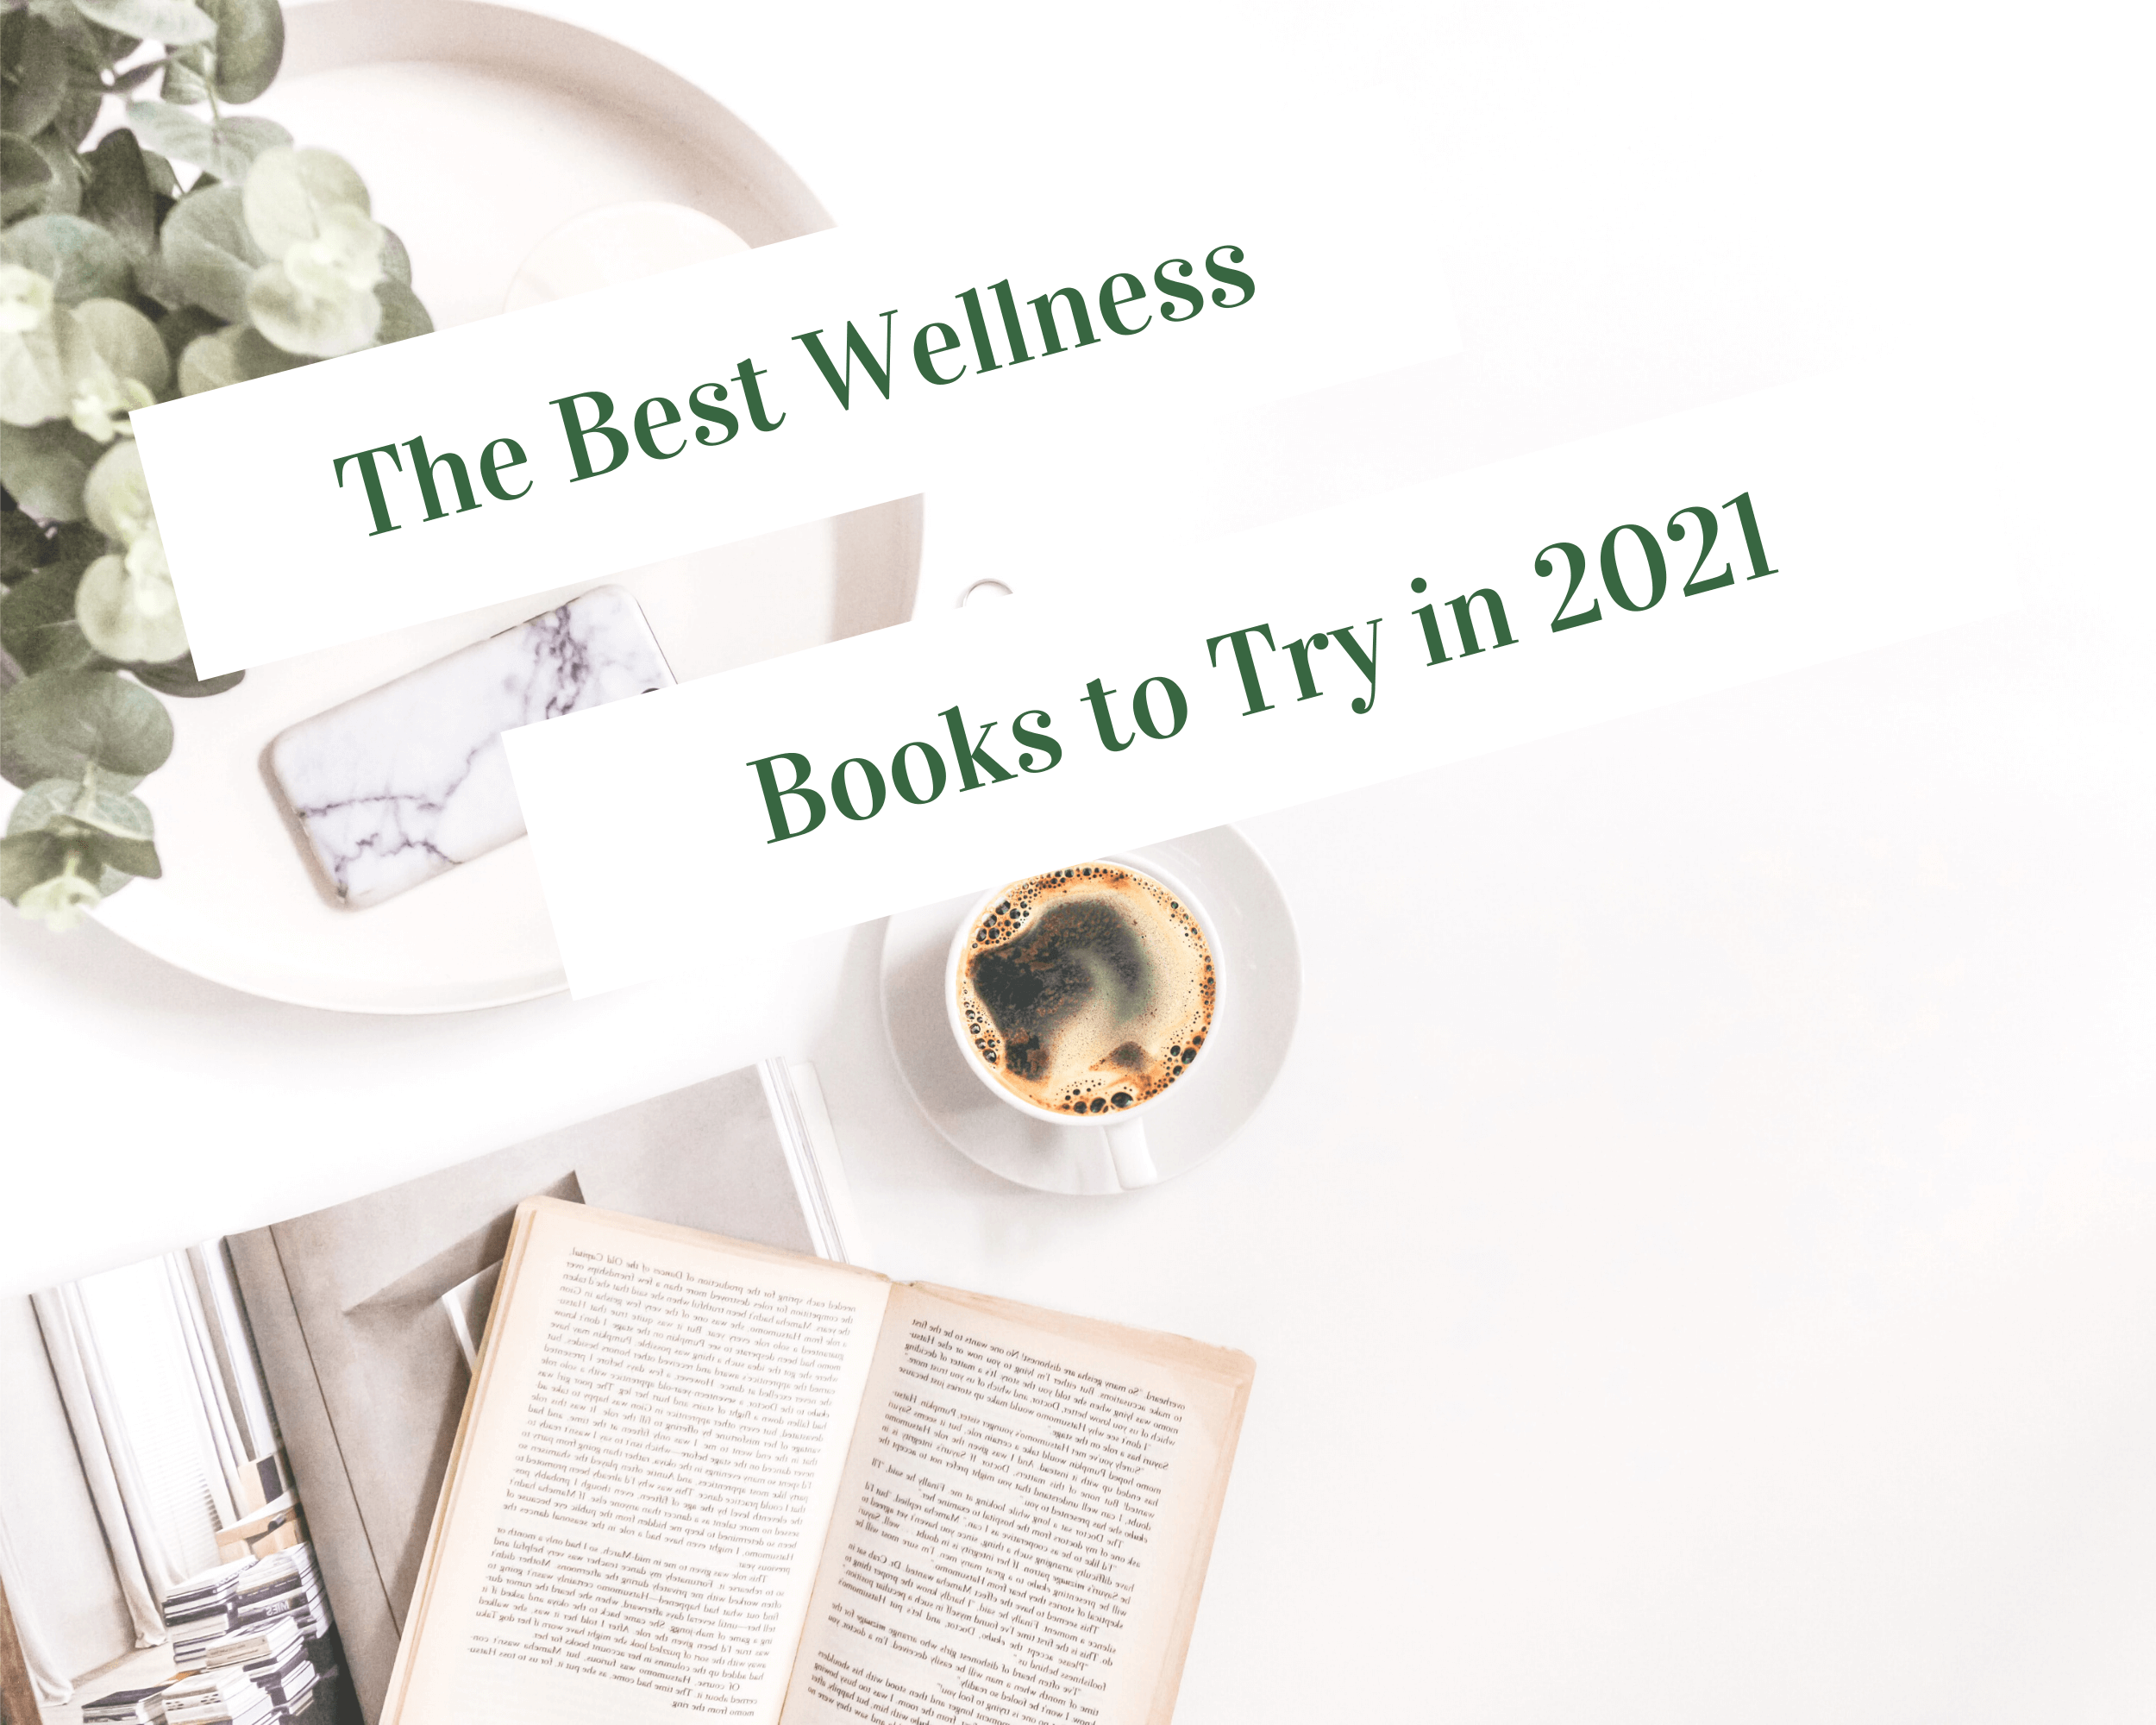 The best wellness books to try in 2021 featured image